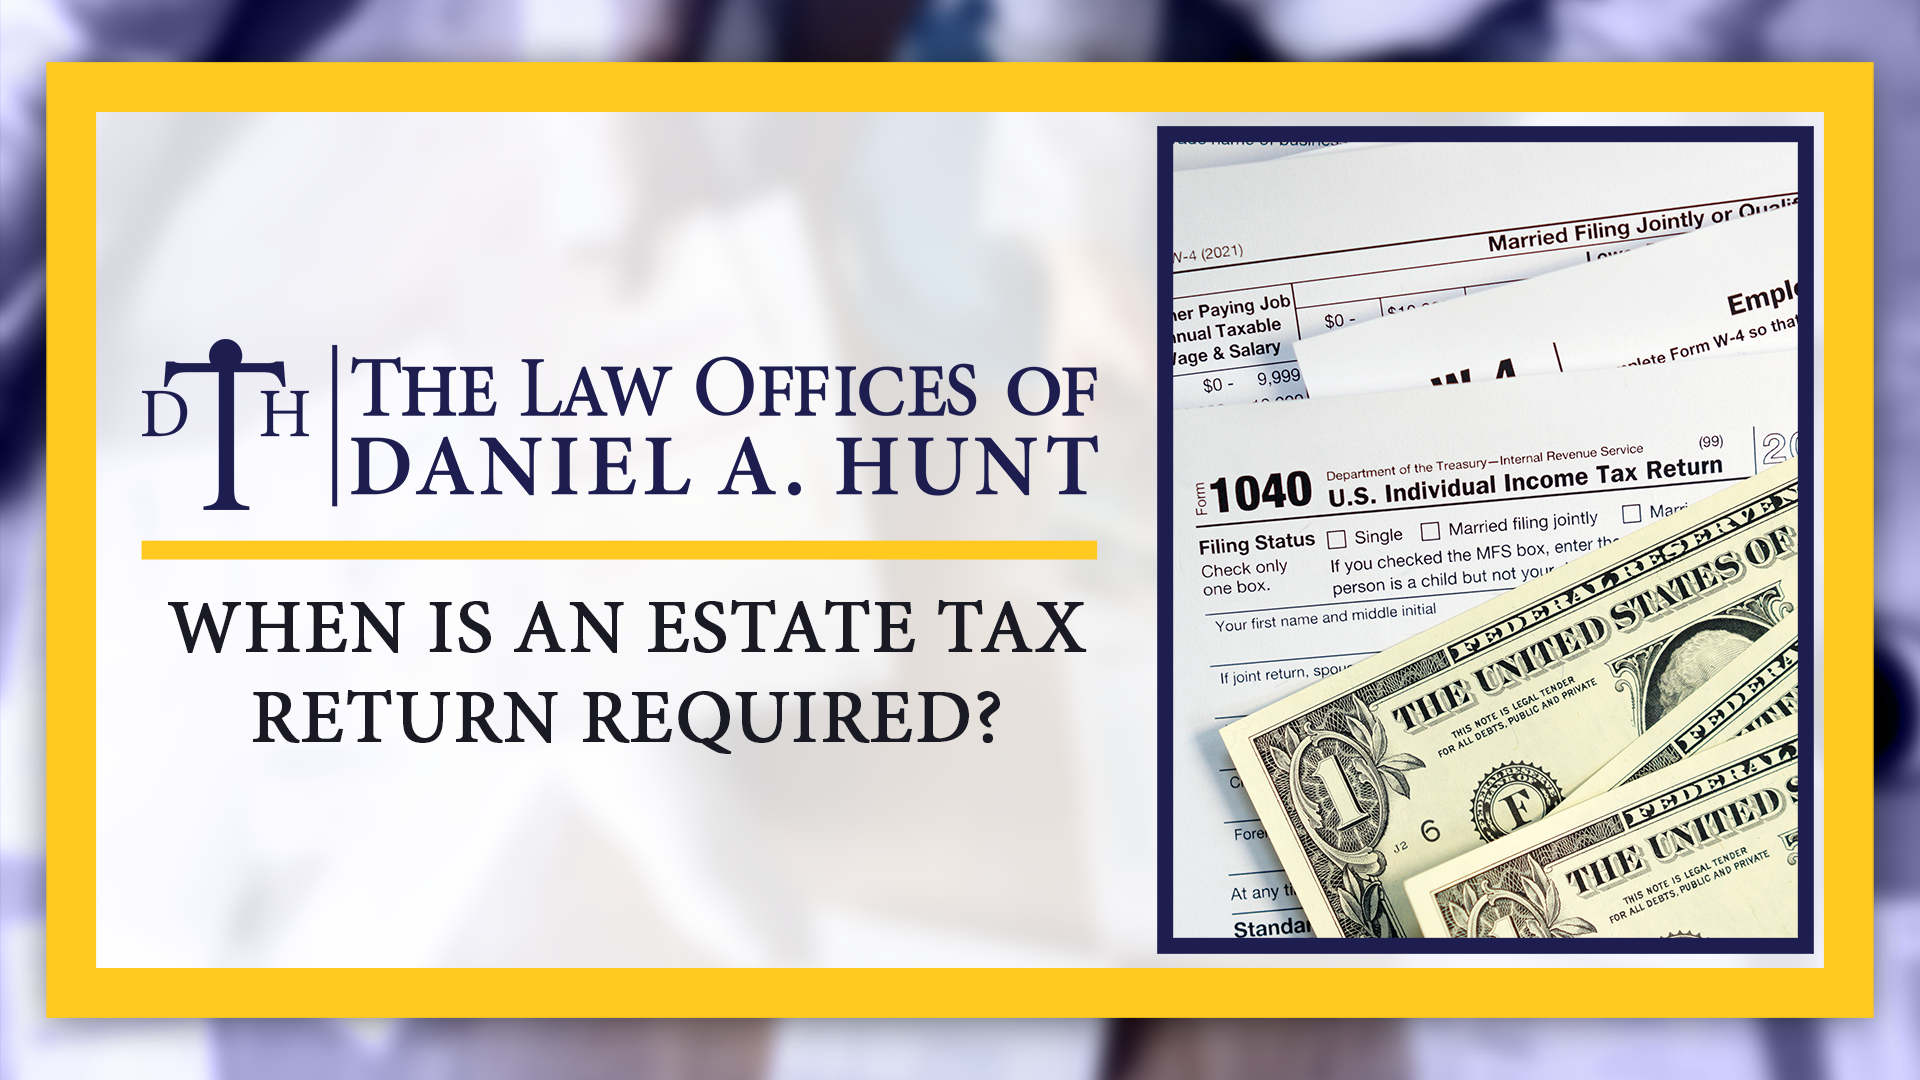 When is an Estate Tax Return Required (1)